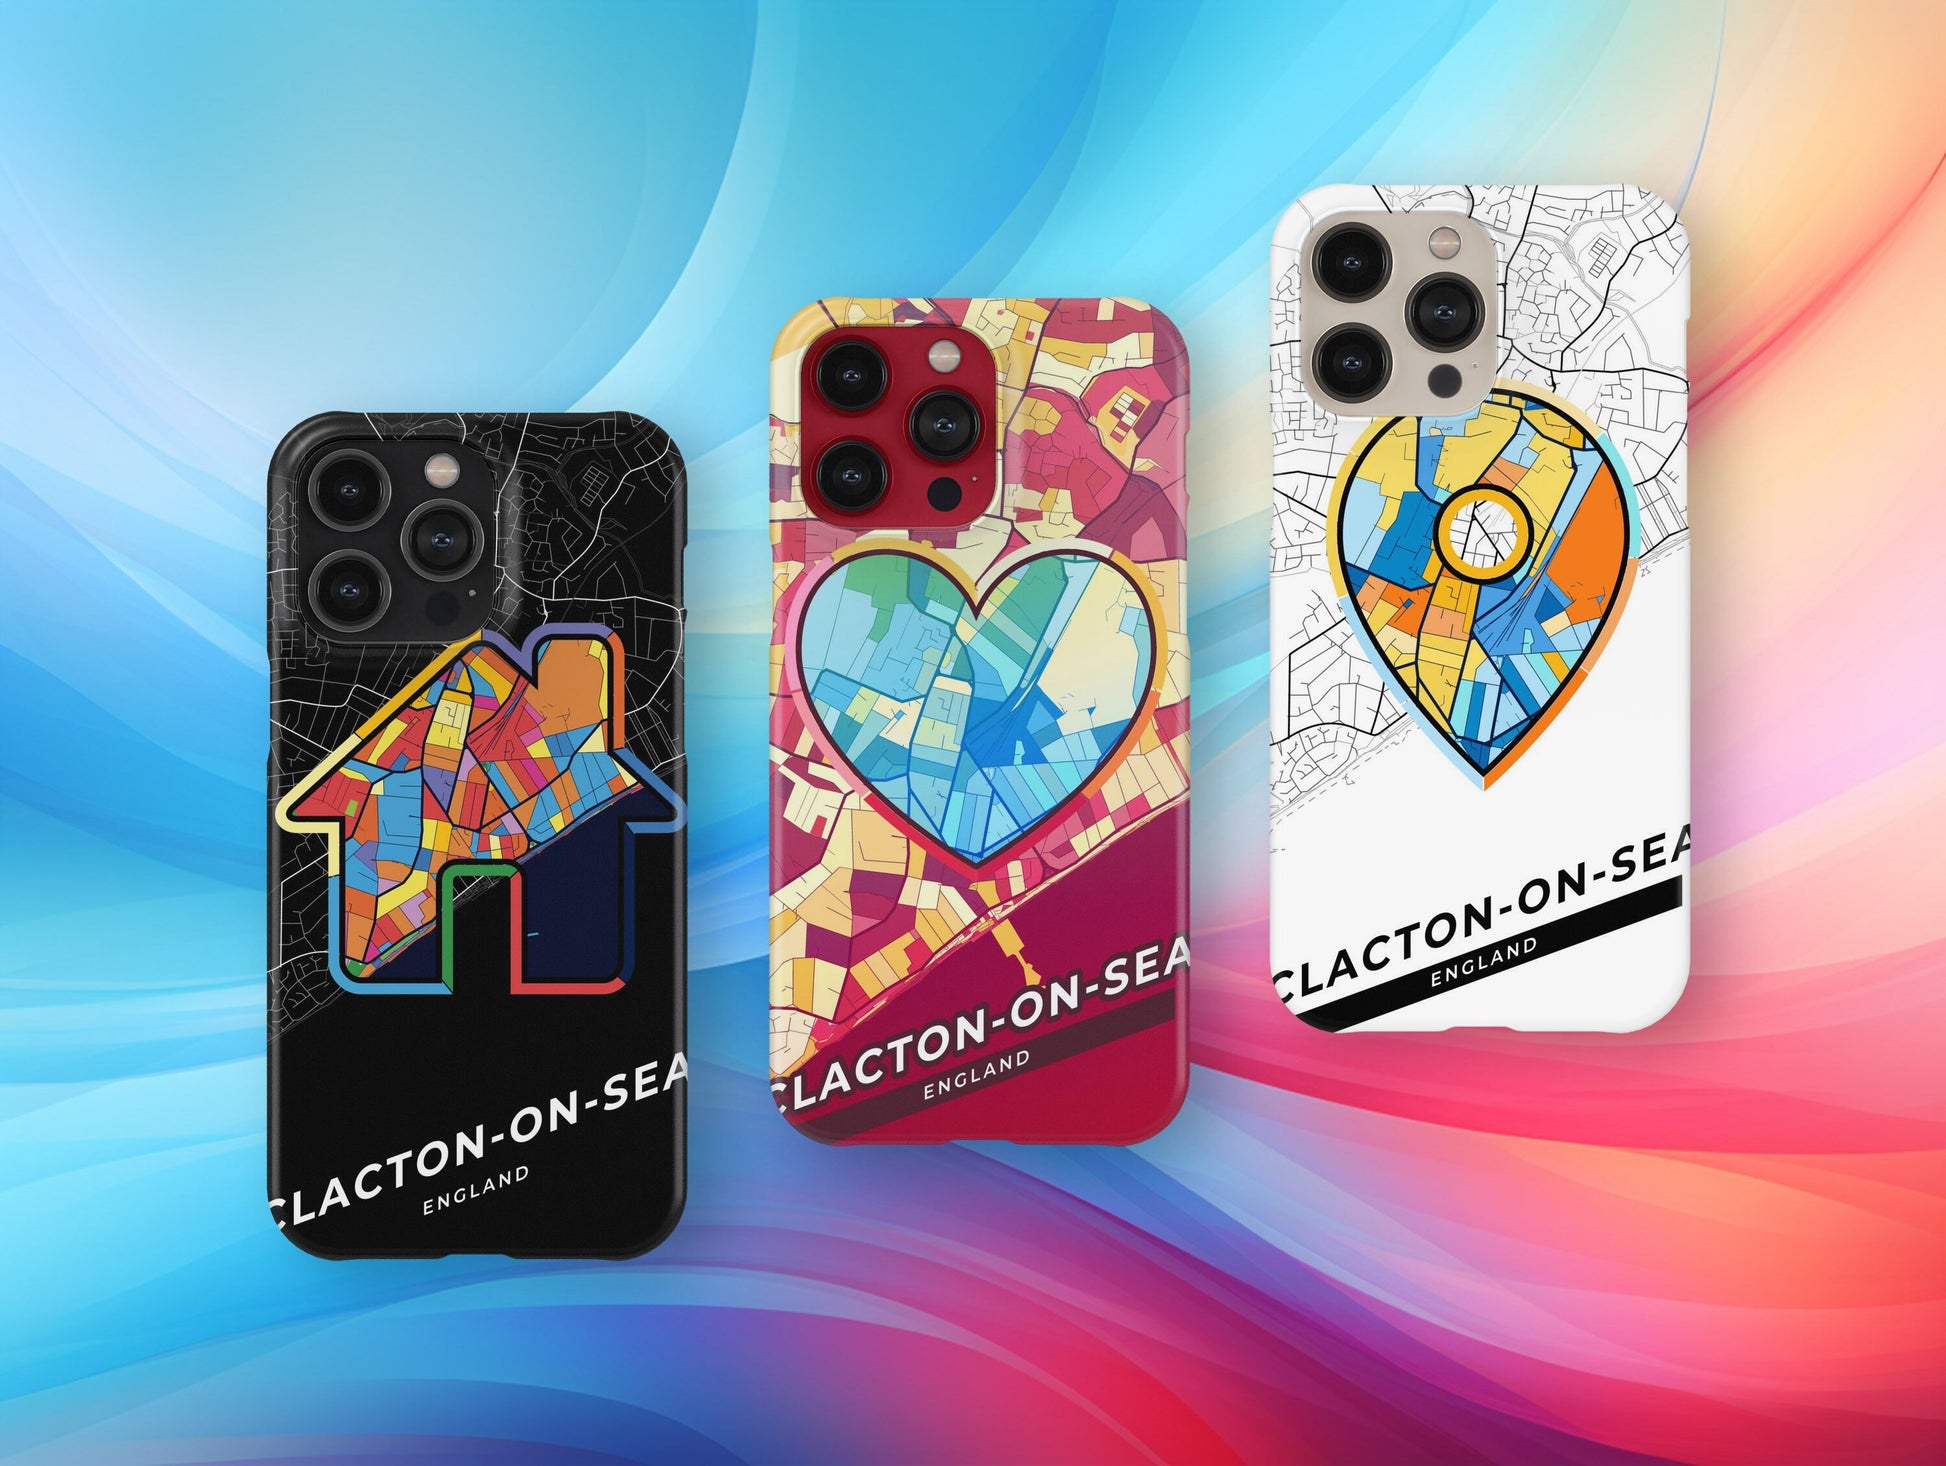 Clacton-On-Sea England slim phone case with colorful icon. Birthday, wedding or housewarming gift. Couple match cases.